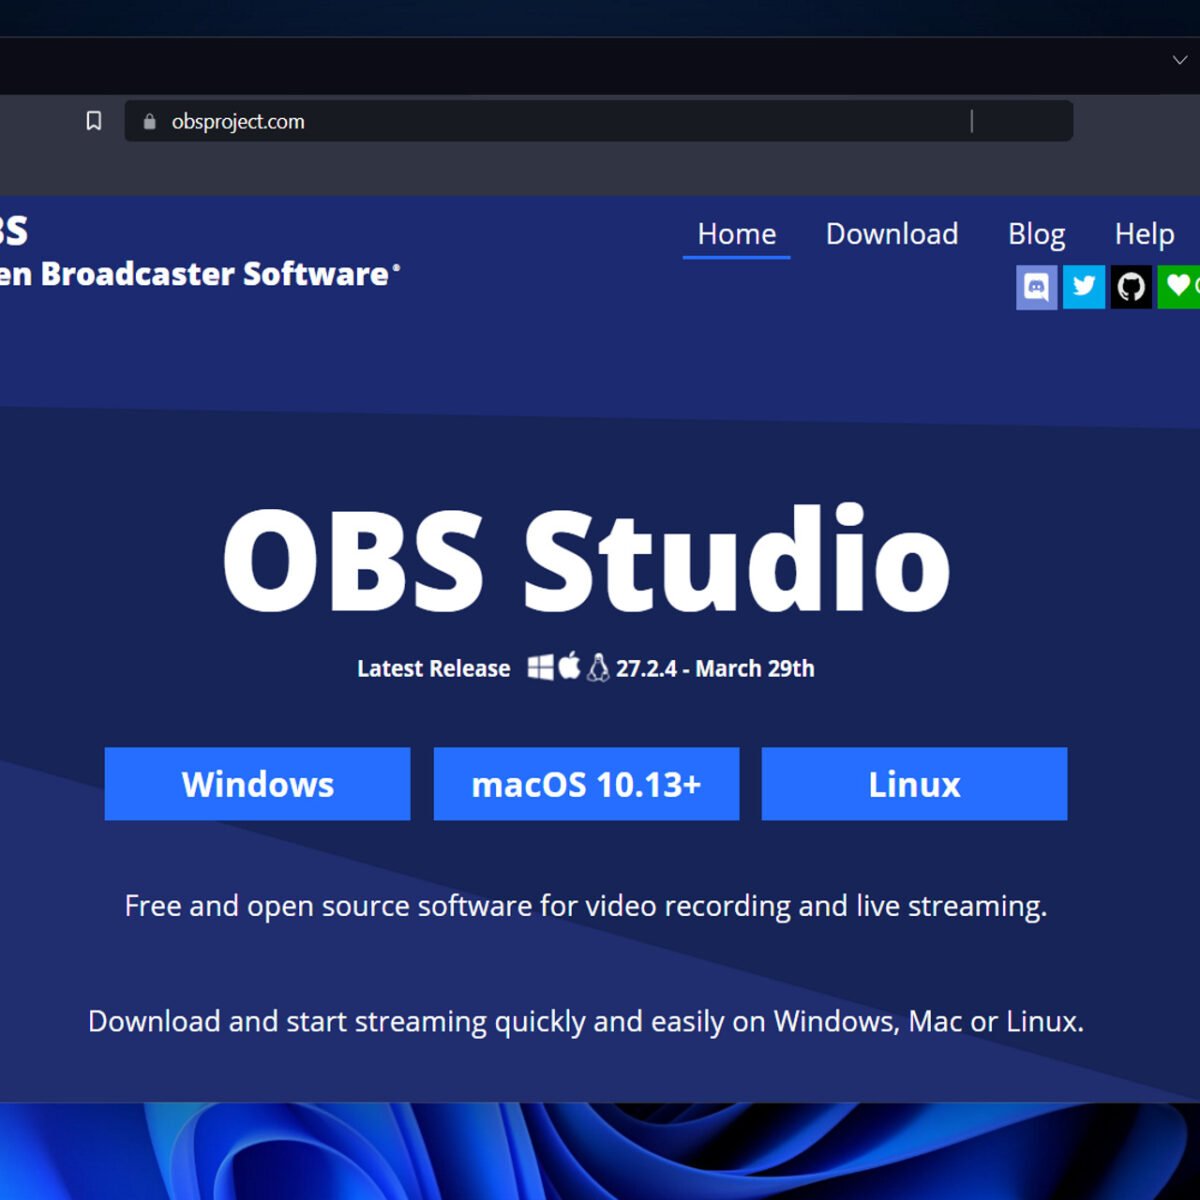 How to Add Browser Source to OBS Studio [Step-by-step]